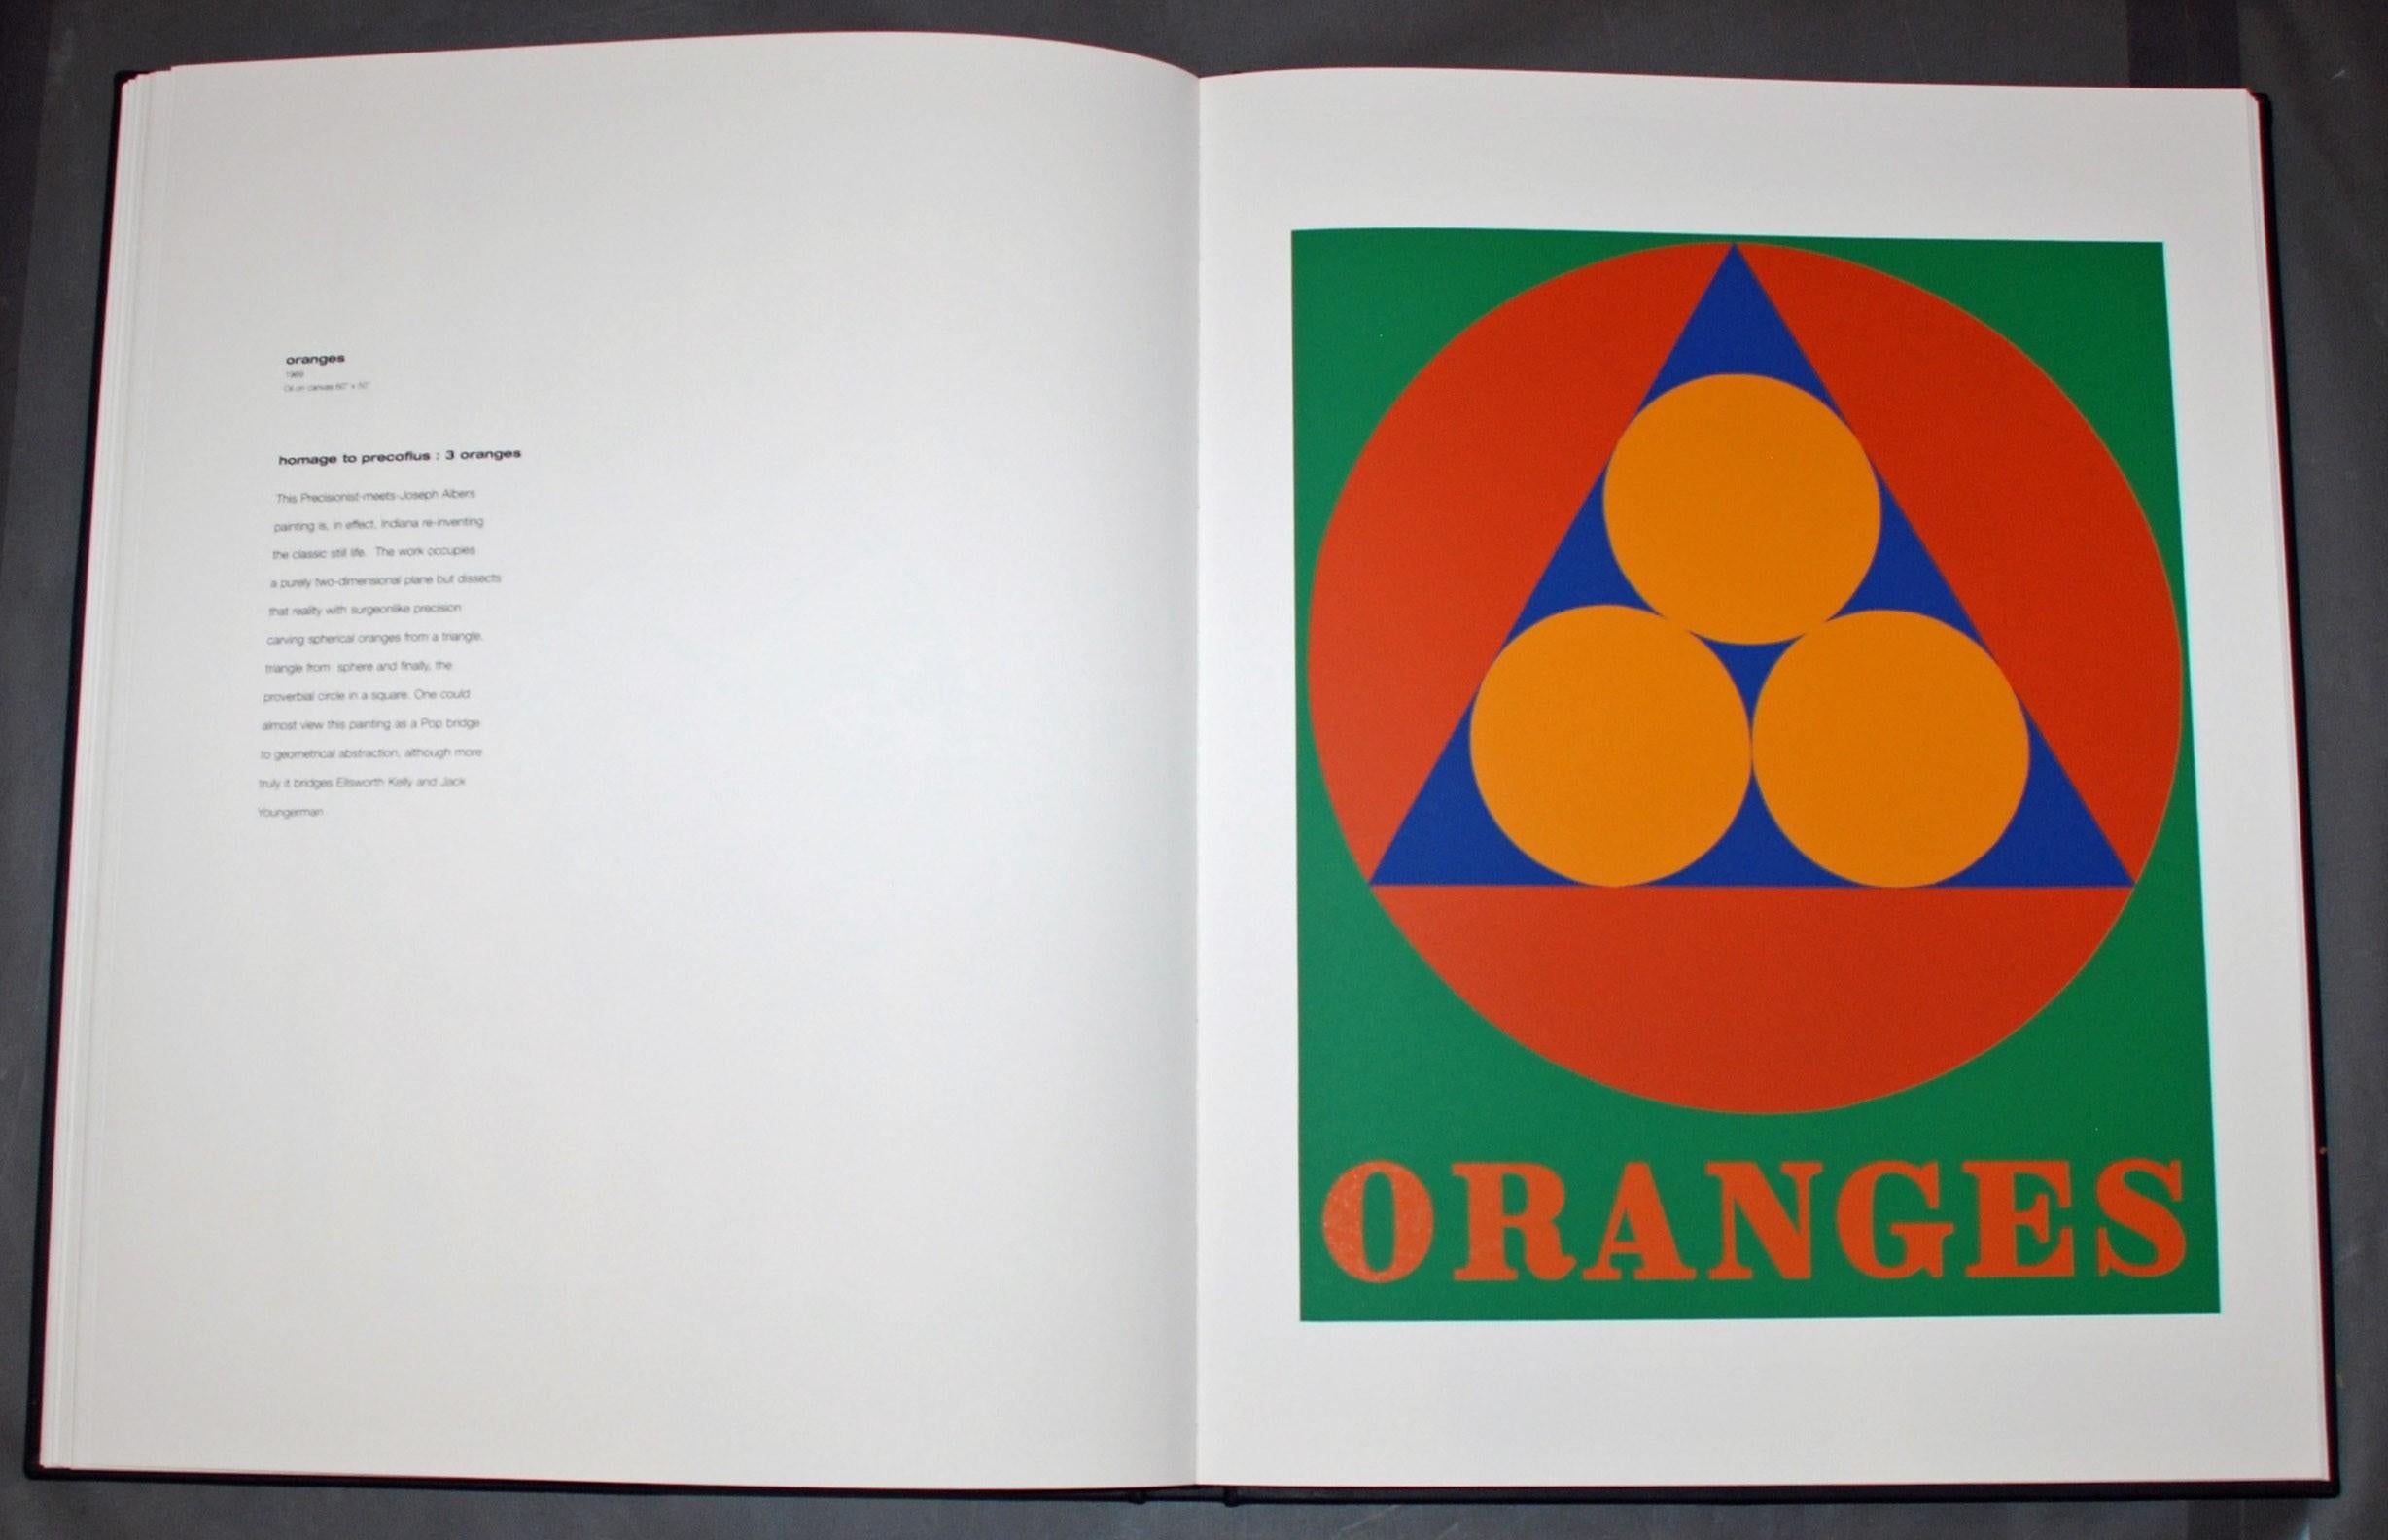 Oranges - Abstract Print by Robert Indiana